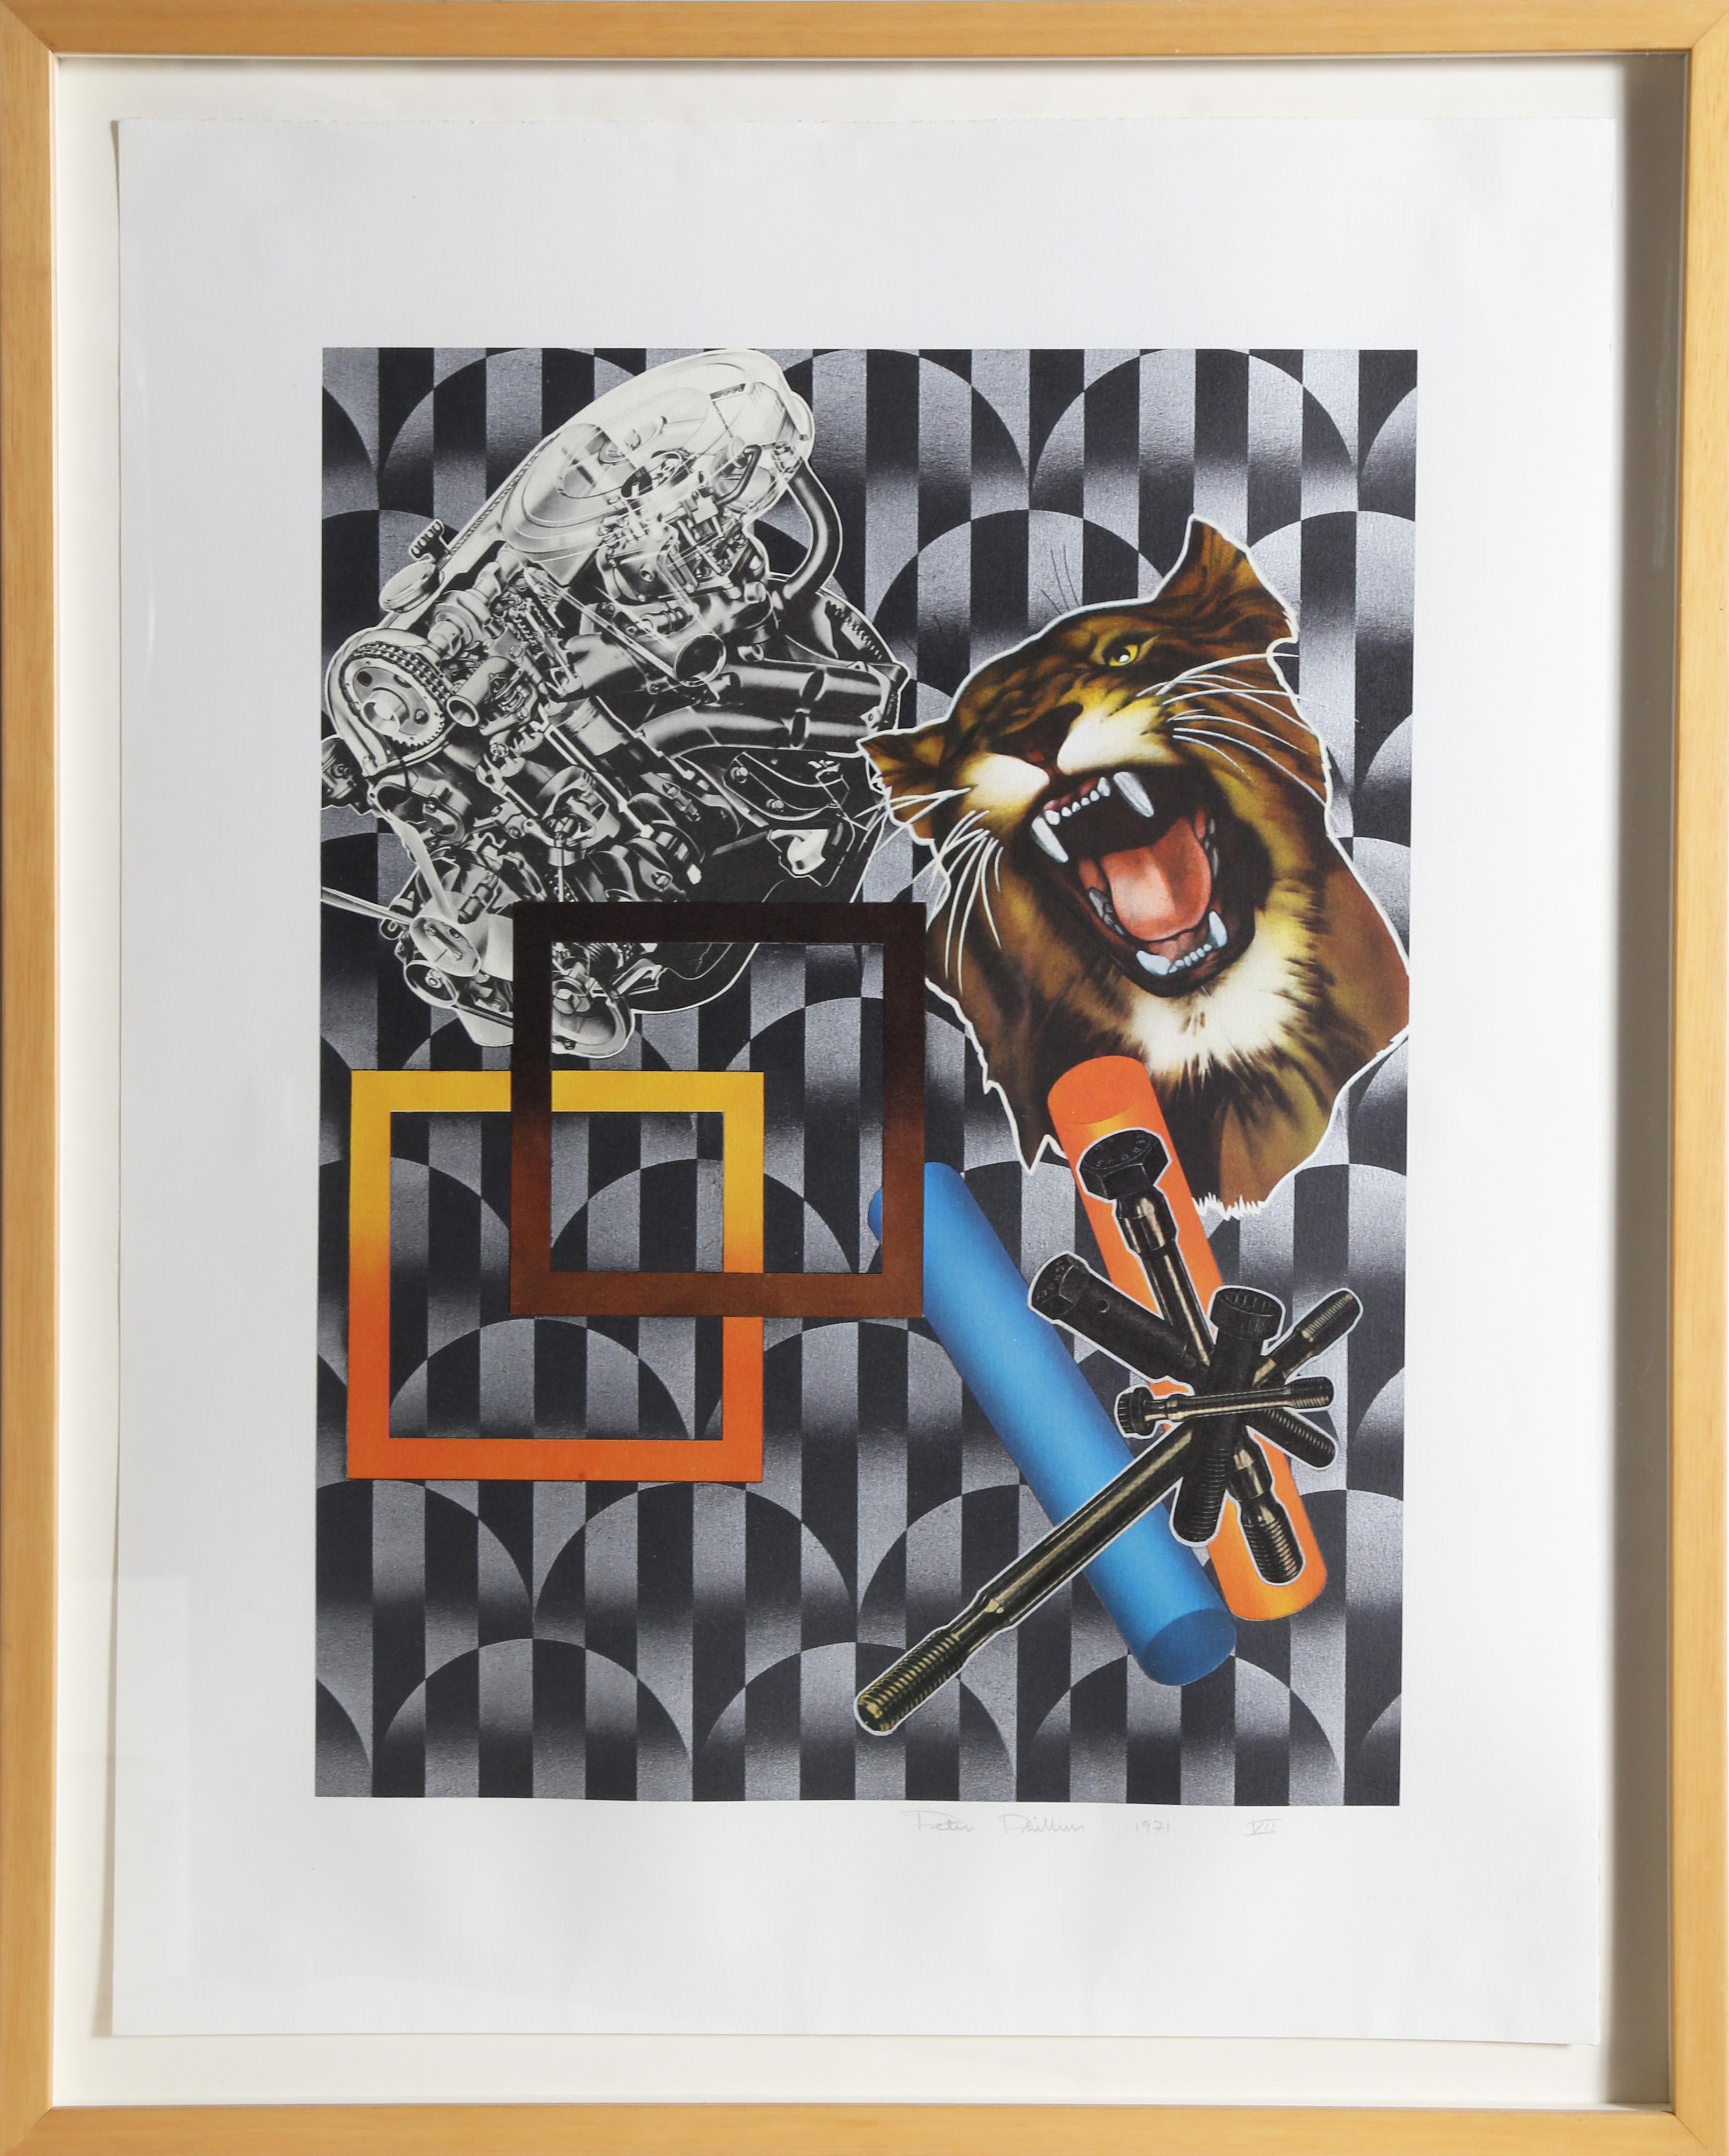 Tiger & Engine by Peter Phillips, British (1939)
Date: 1971
Lithograph, signed and dated in pencil
Edition: AP VII
Size: 19 x 14.25 in. (48.26 x 36.2 cm)
Frame Size: 28.5 x 23 inches